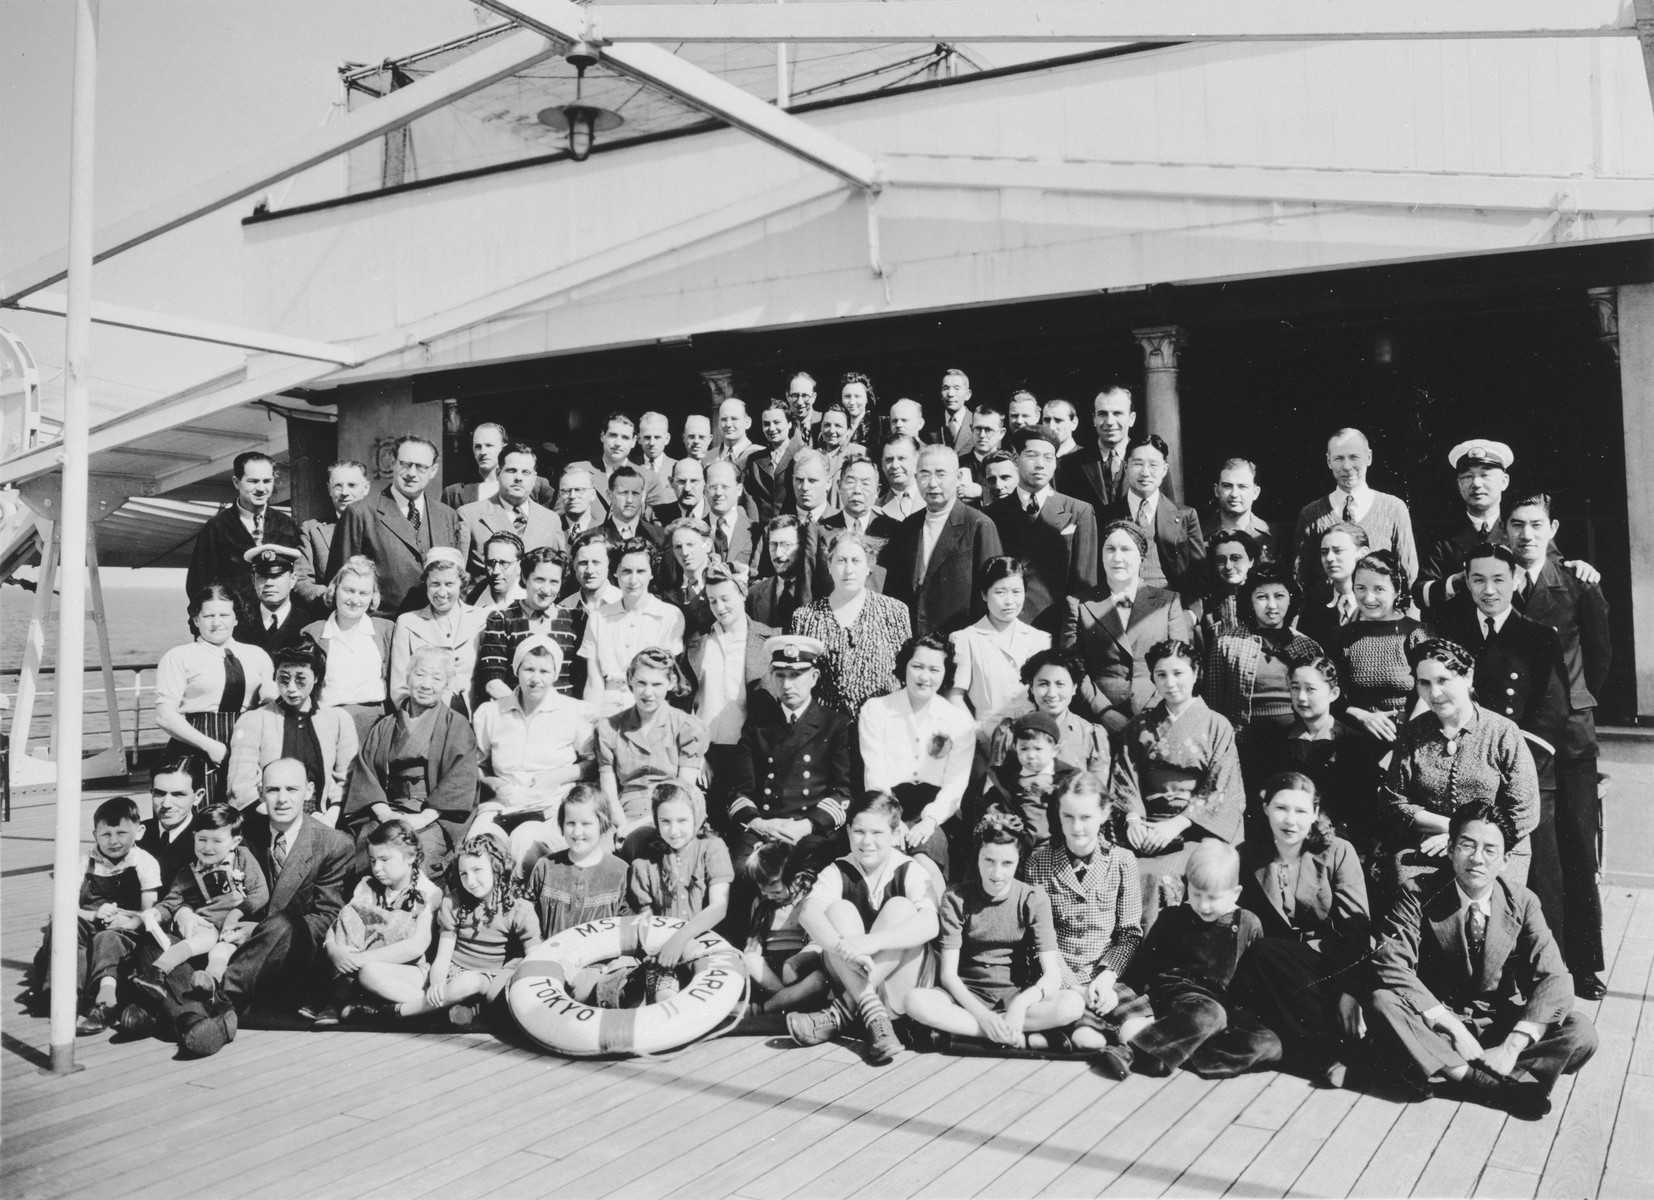 Group portrait of passengers on board the Asama Maru en route from Yokohama via Oahu to San Francisco.

Among those pictured are the ships' crew, Irena Malowist (sitting in the front row, fifth from the right); her mother Maria Malowist (standing in the third row, sixth from the left) and her father Szymon Malowist (standing at the back).